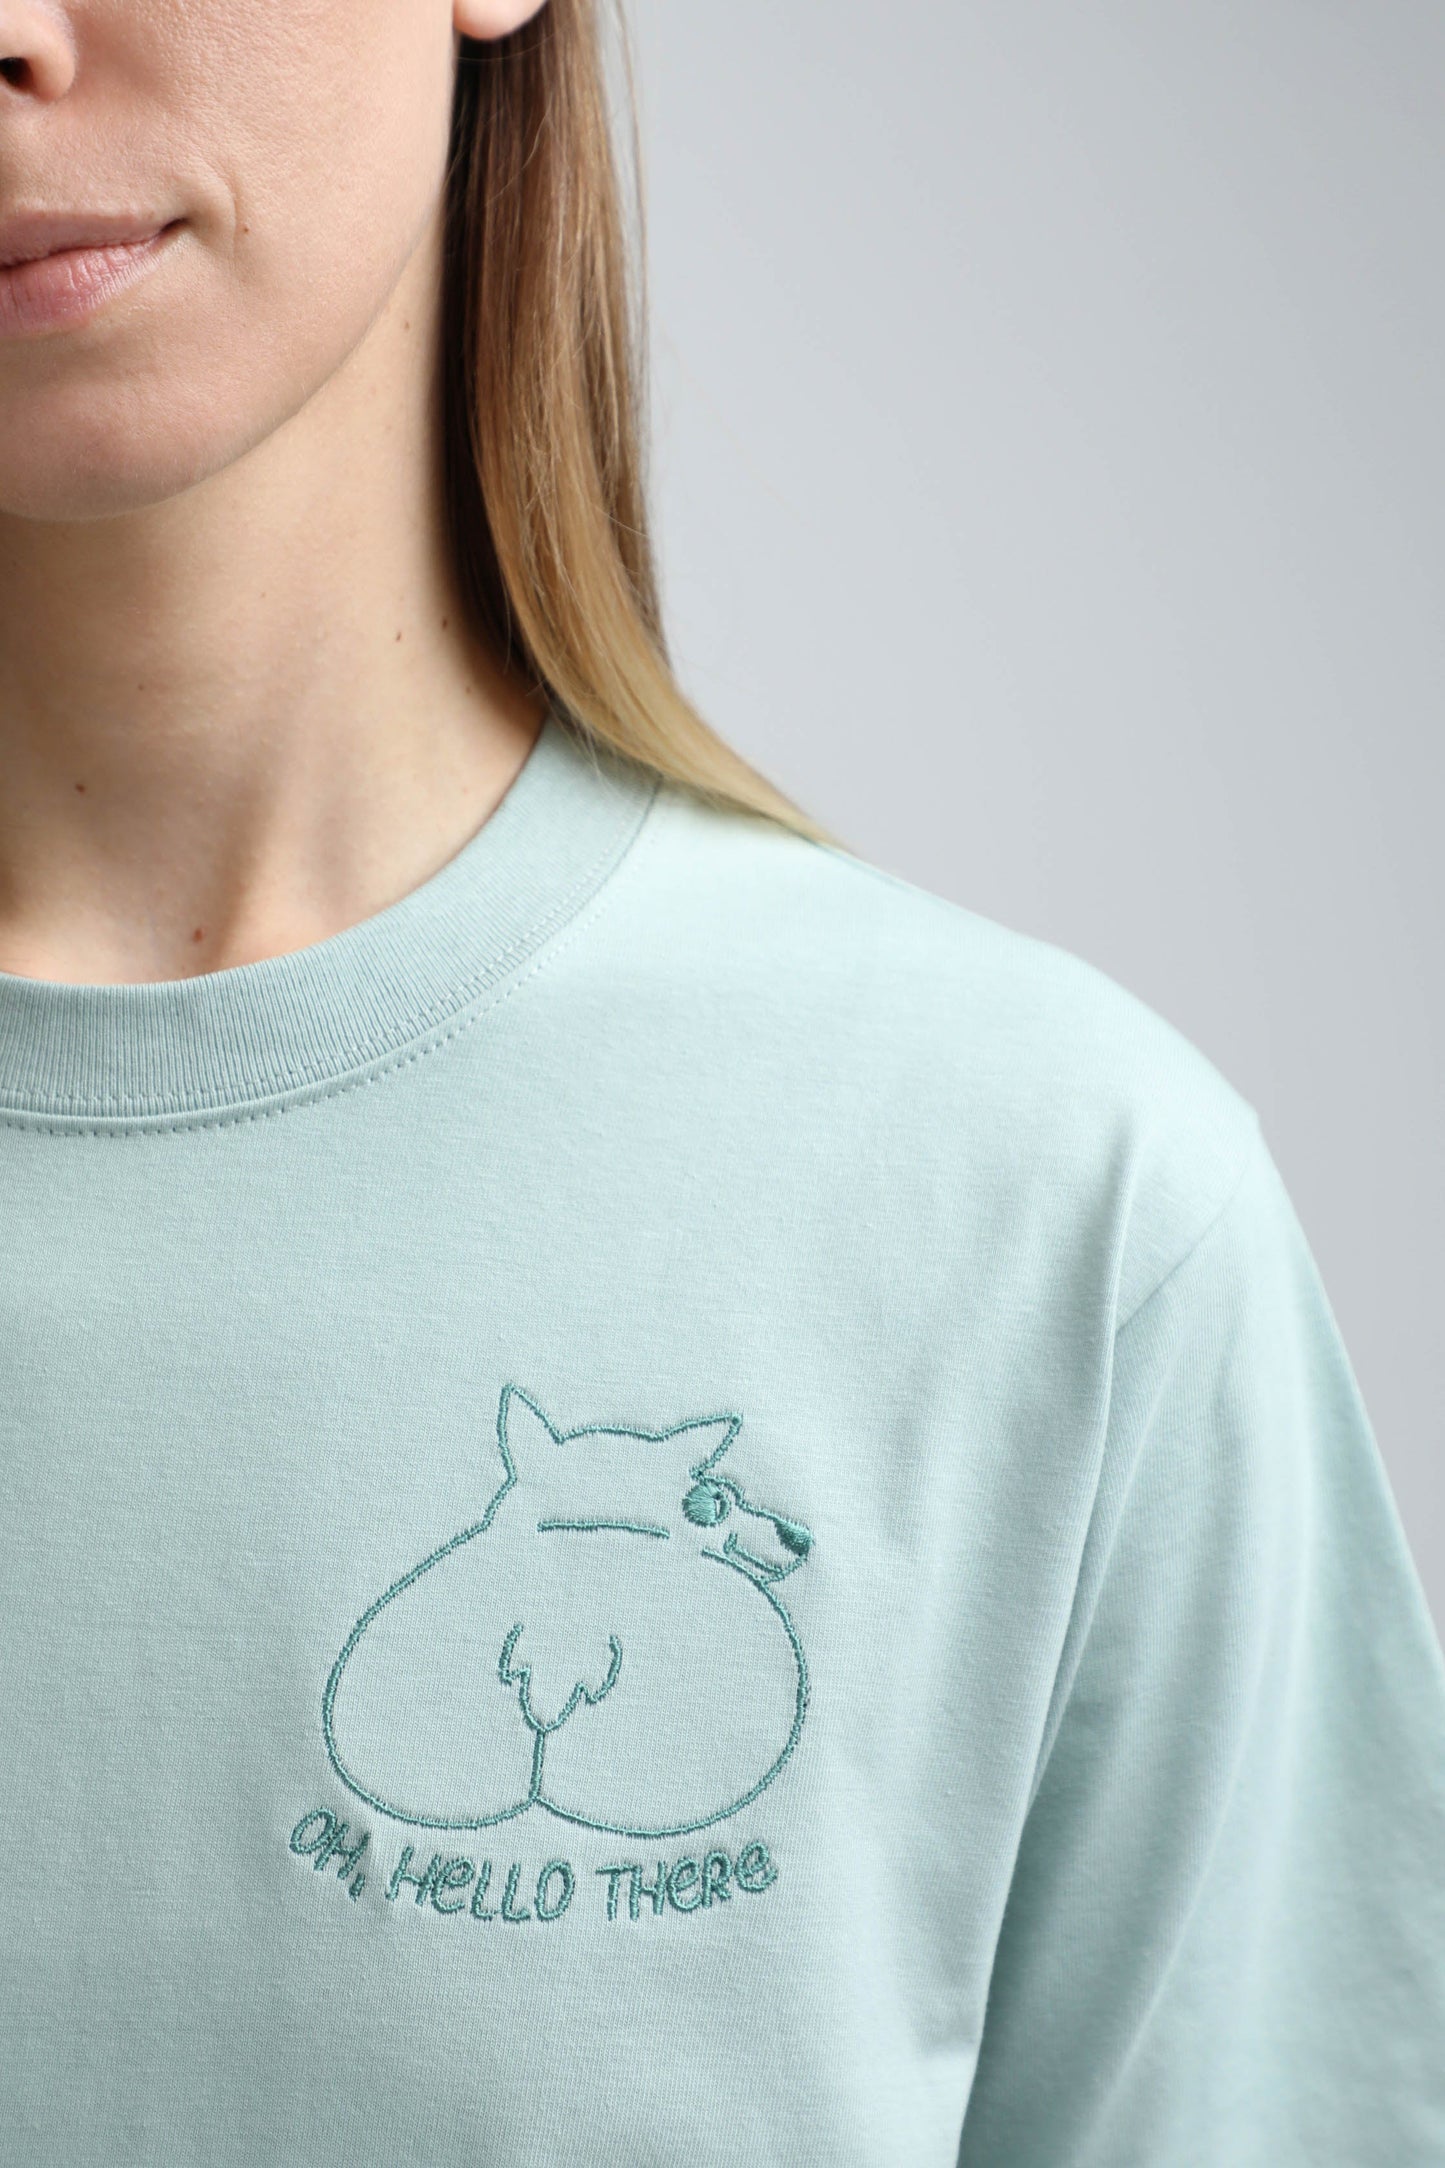 -25% | XL available only | Oh, hello there! | Heavyweight T-Shirt with embroidered dog. Oversized | Unisex - premium dog goods handmade in Europe by My Wild Other